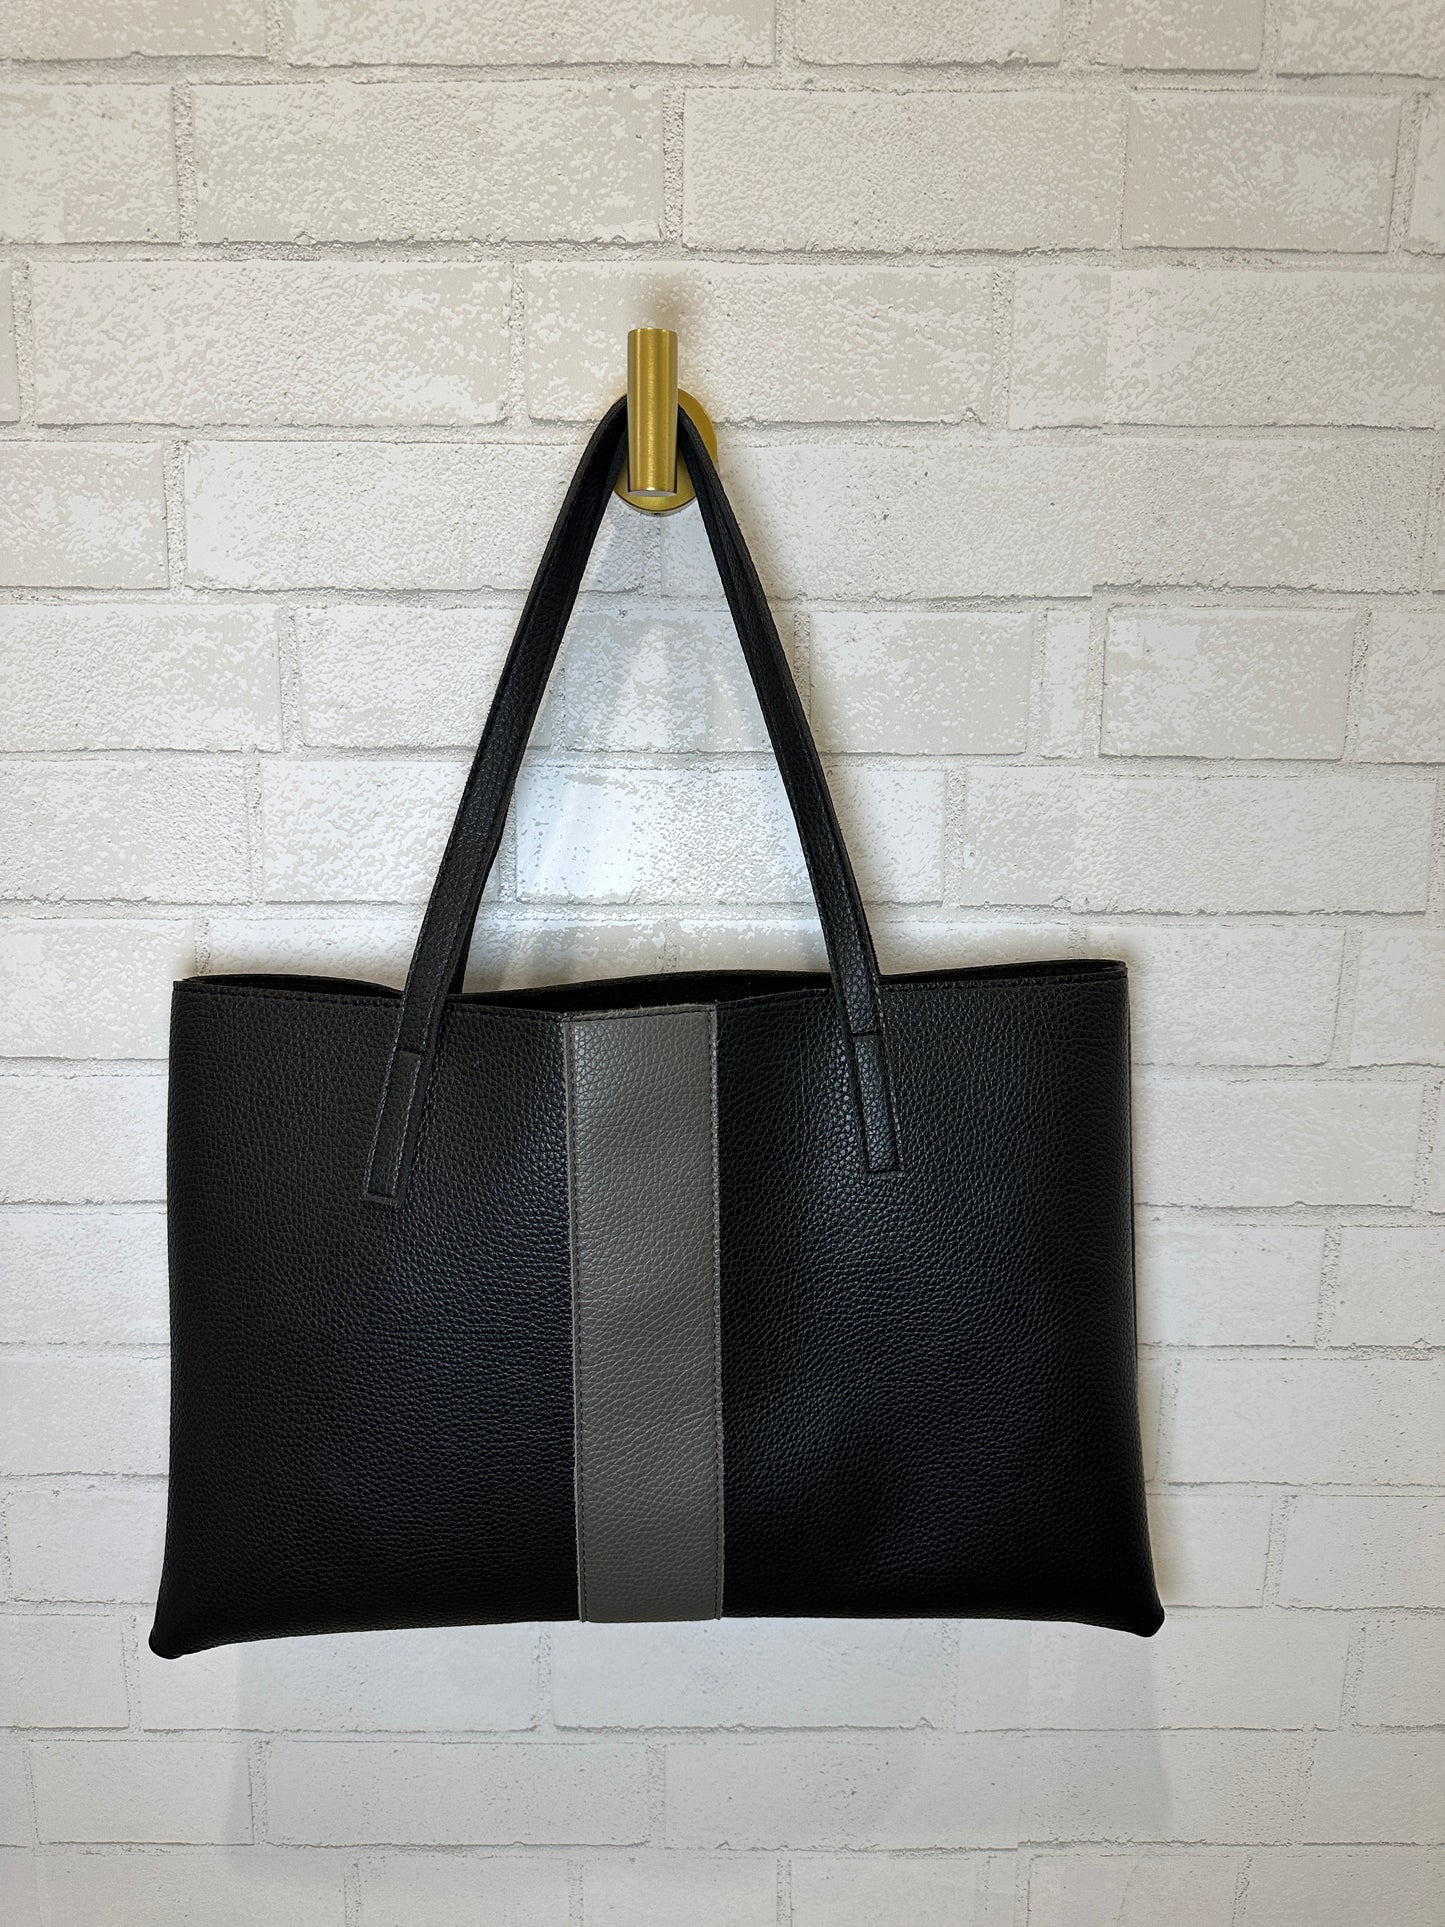 VINCE CAMUTO Vegan Leather Tote Bag